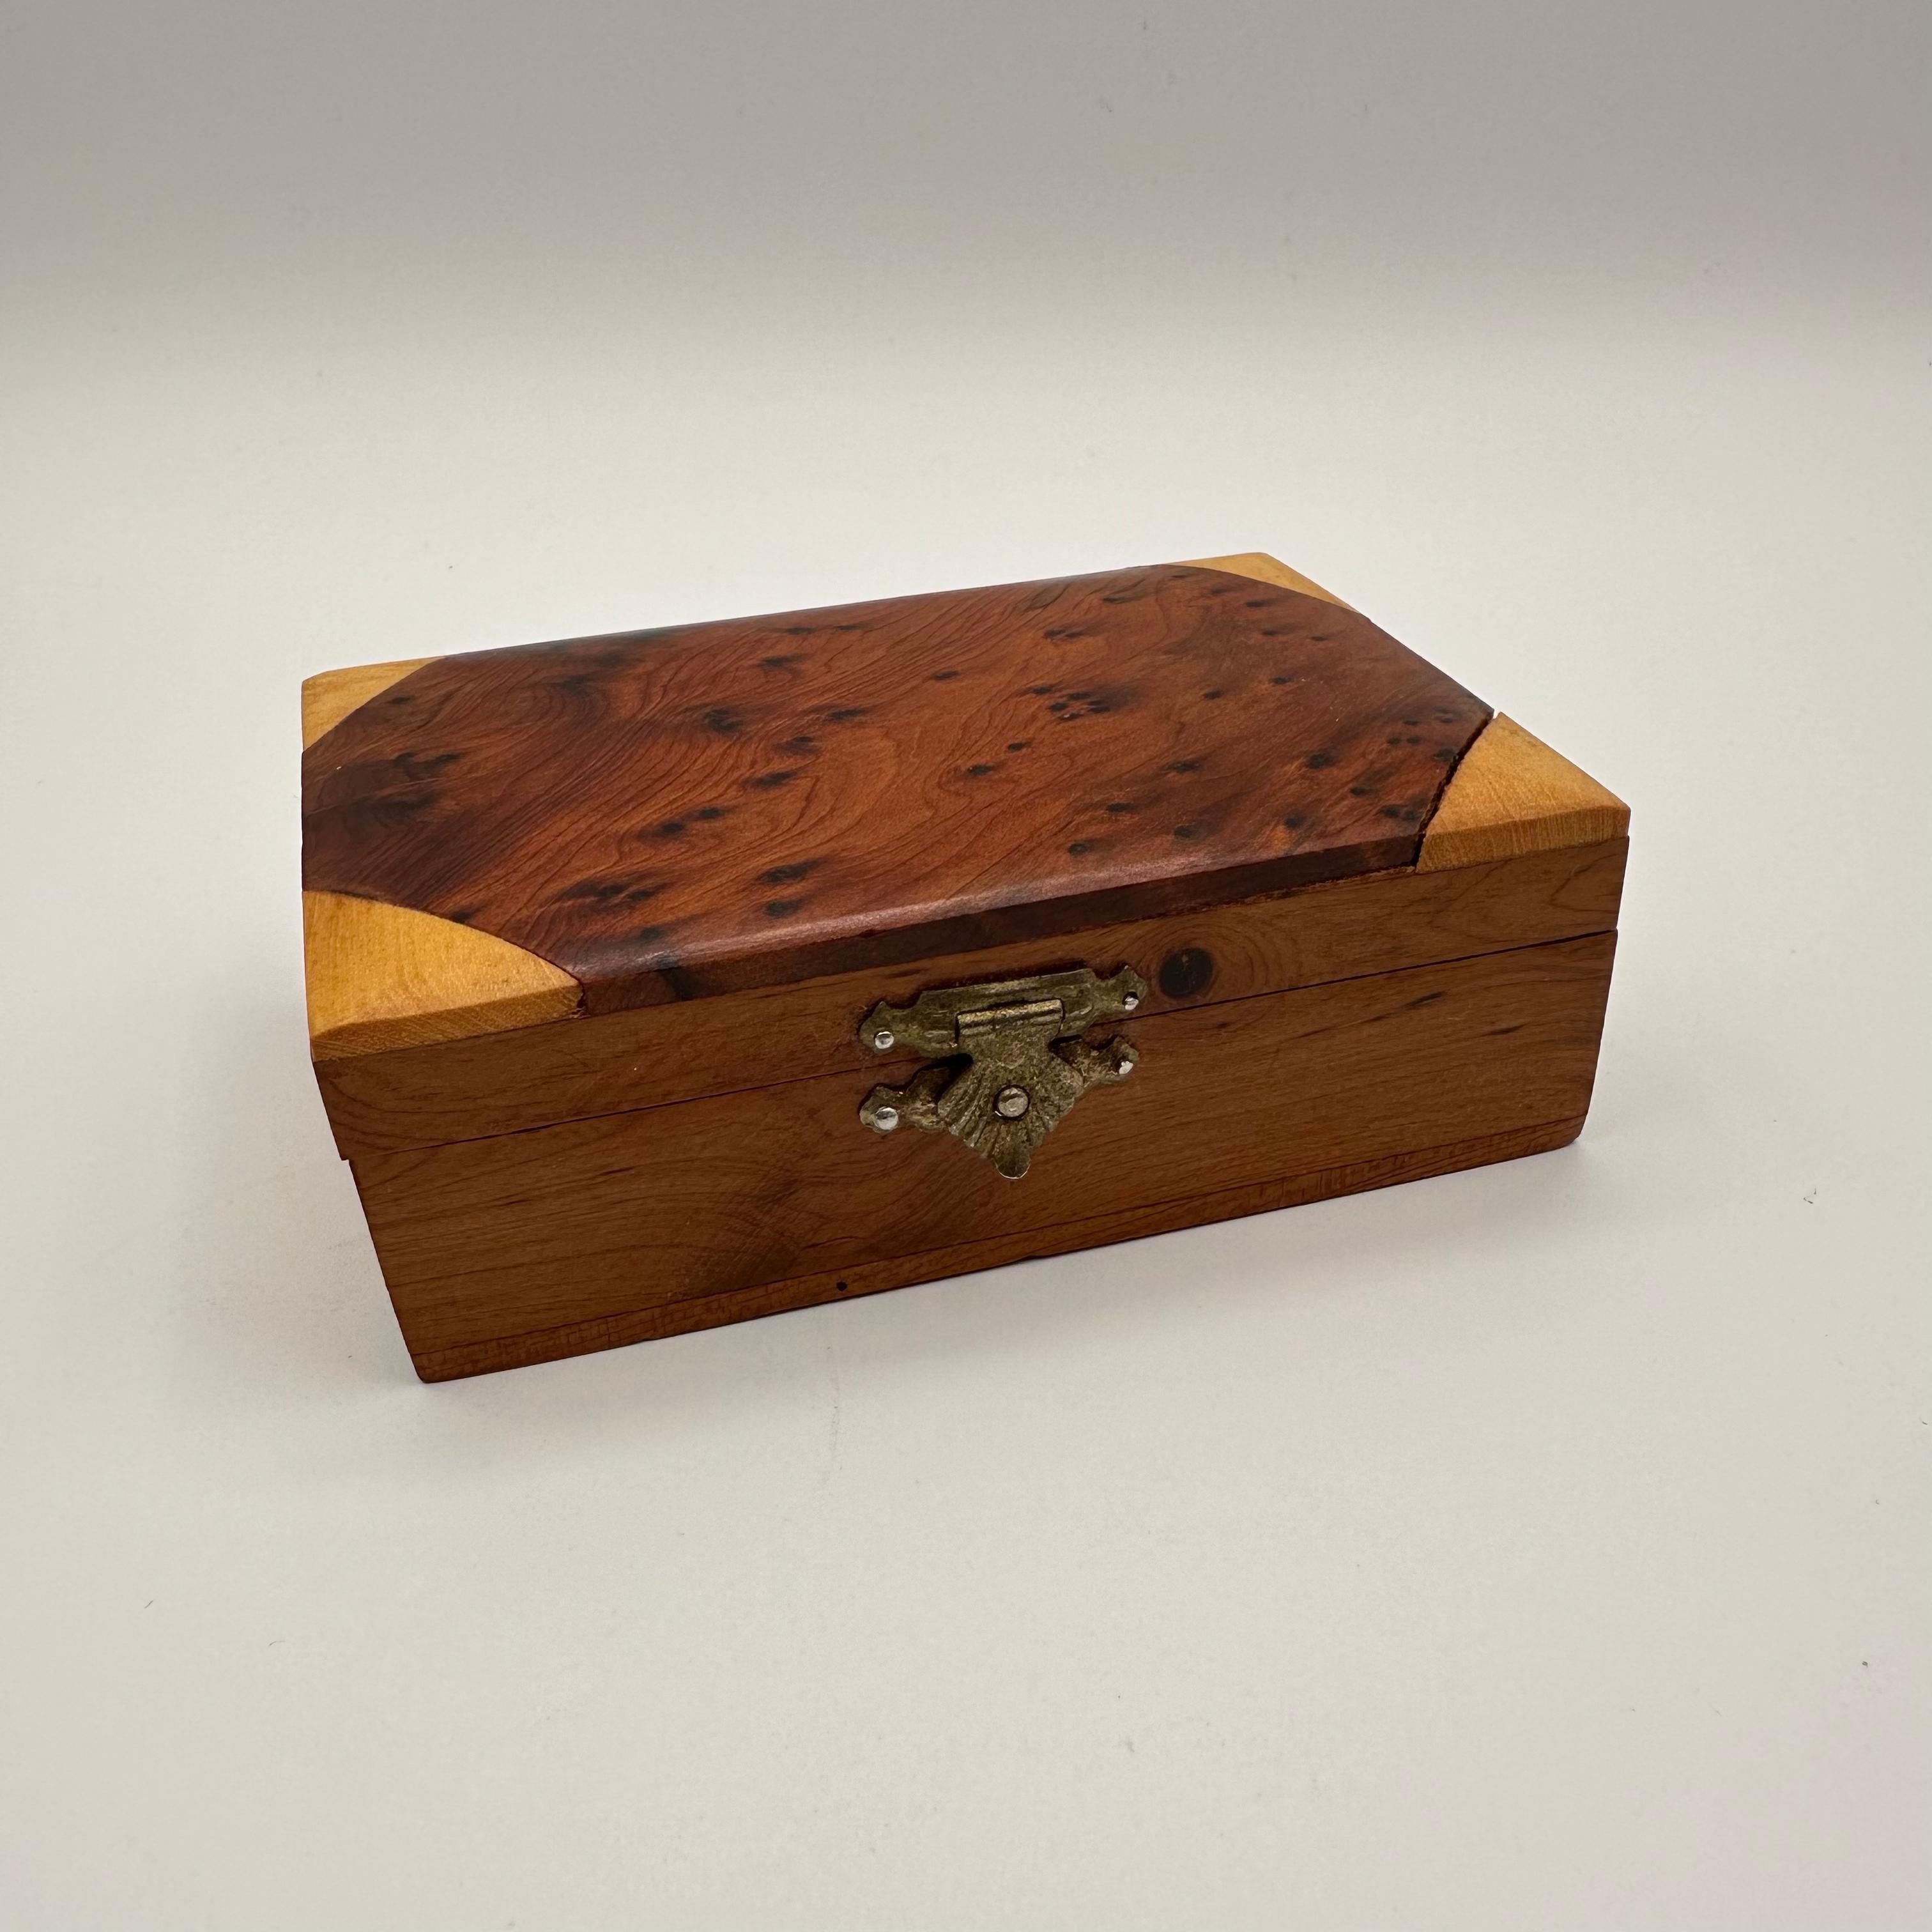 A small vintage rectangular lidded box with multiple species of wood. Primarily in a darker wood with small burls, featuring inlaid triangle shaped corners in a lighter wood tone. The lid is hinged and closes with a small brass clasp with a